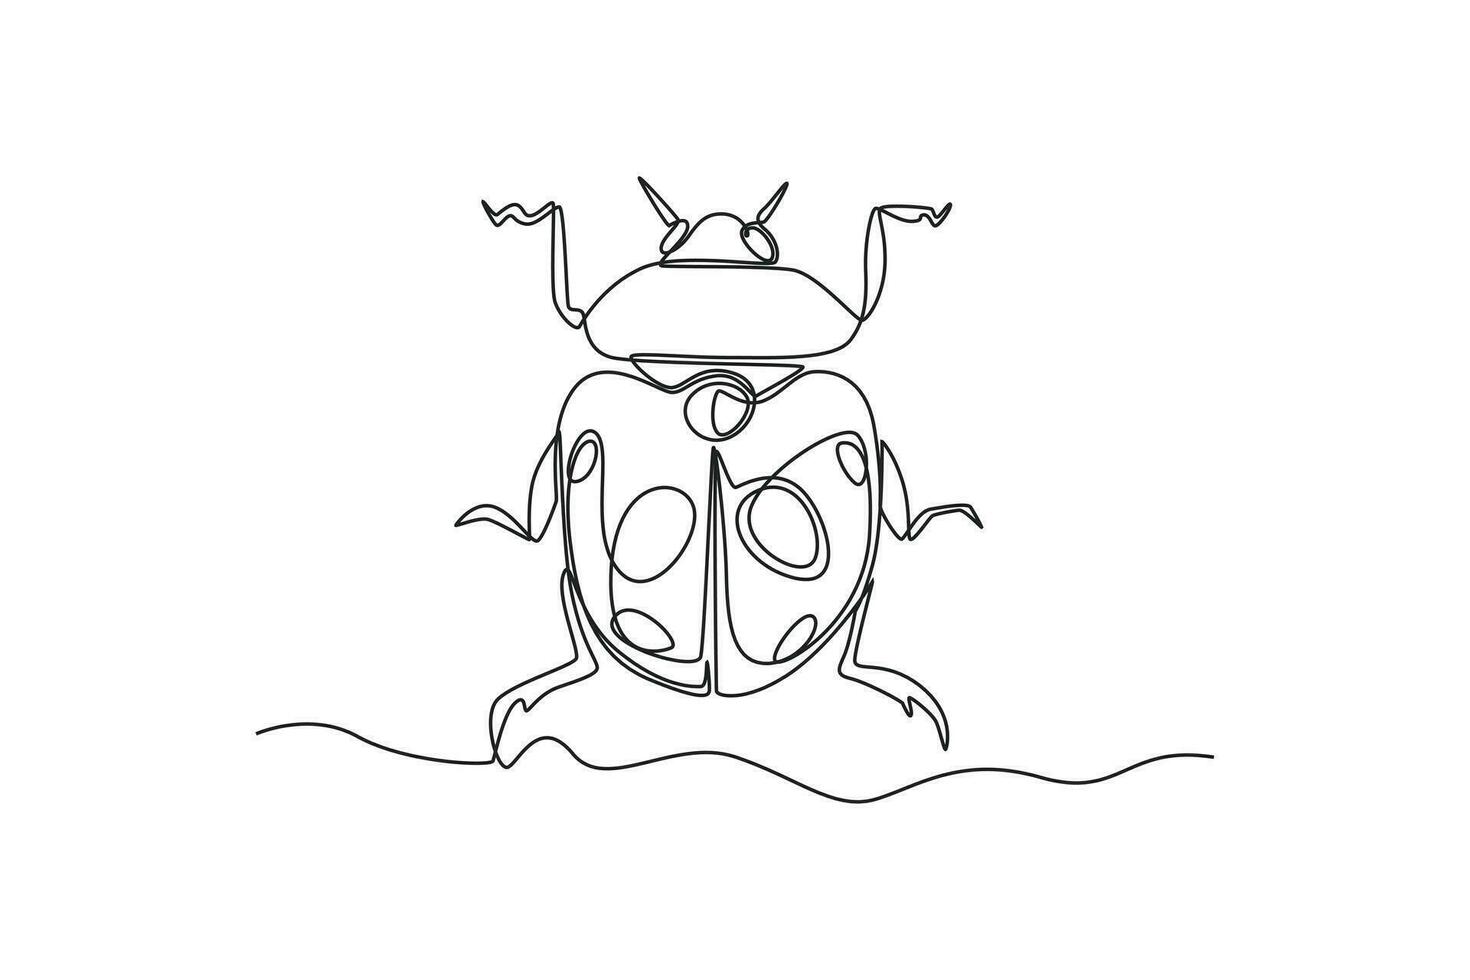 Continuous one line drawing insects concept. Single line draw design vector graphic illustration.